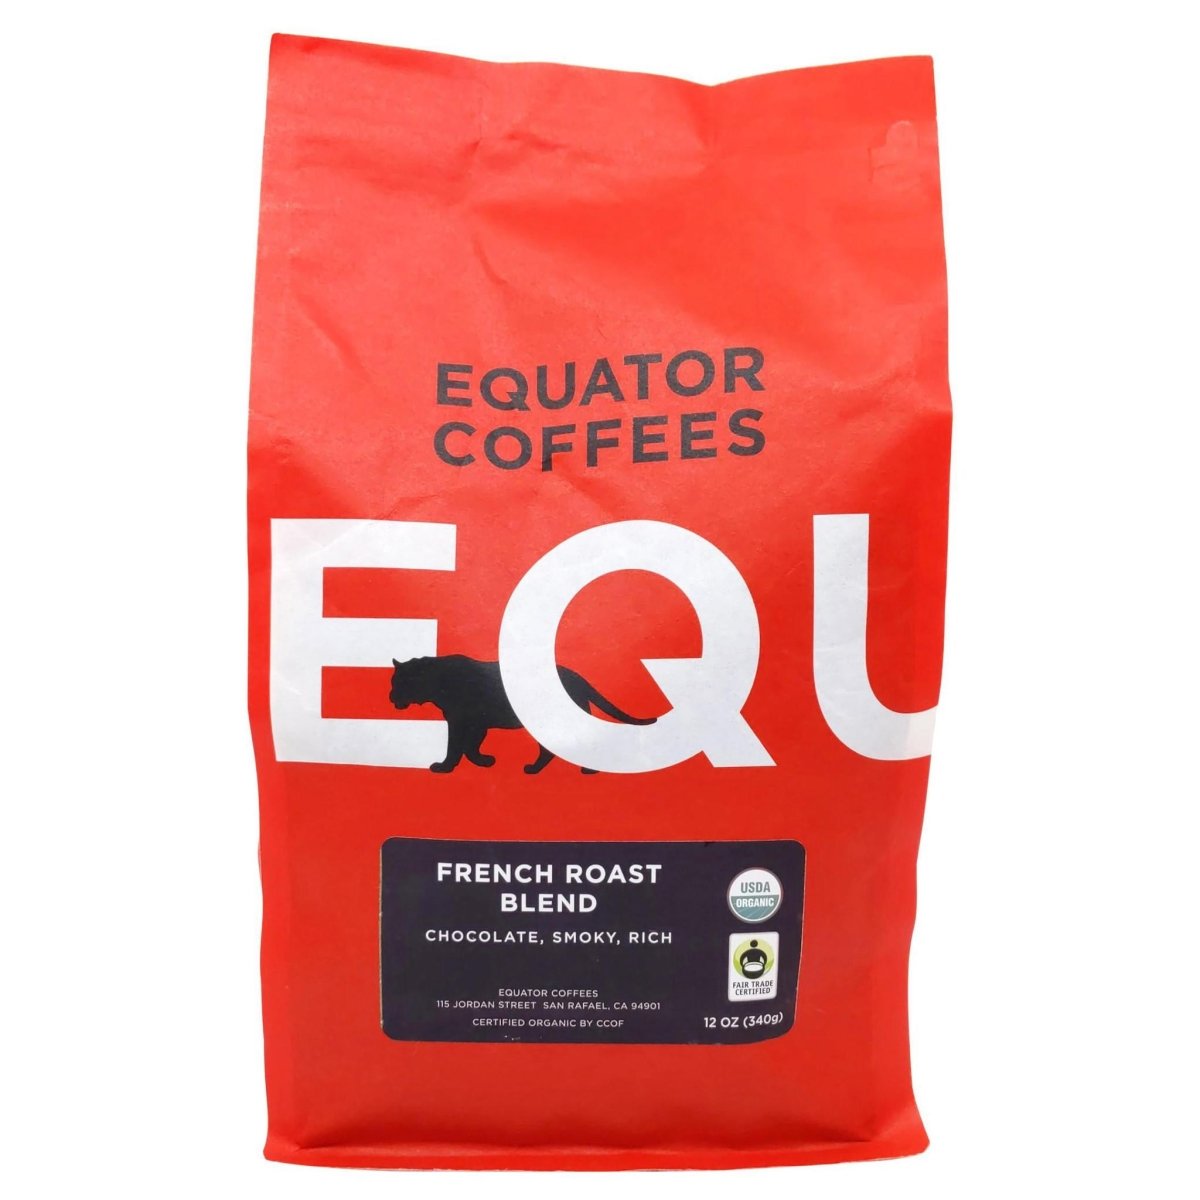 Equator Coffees - French Roast Blend Coffee Beans (12OZ) - The Epicurean Trader